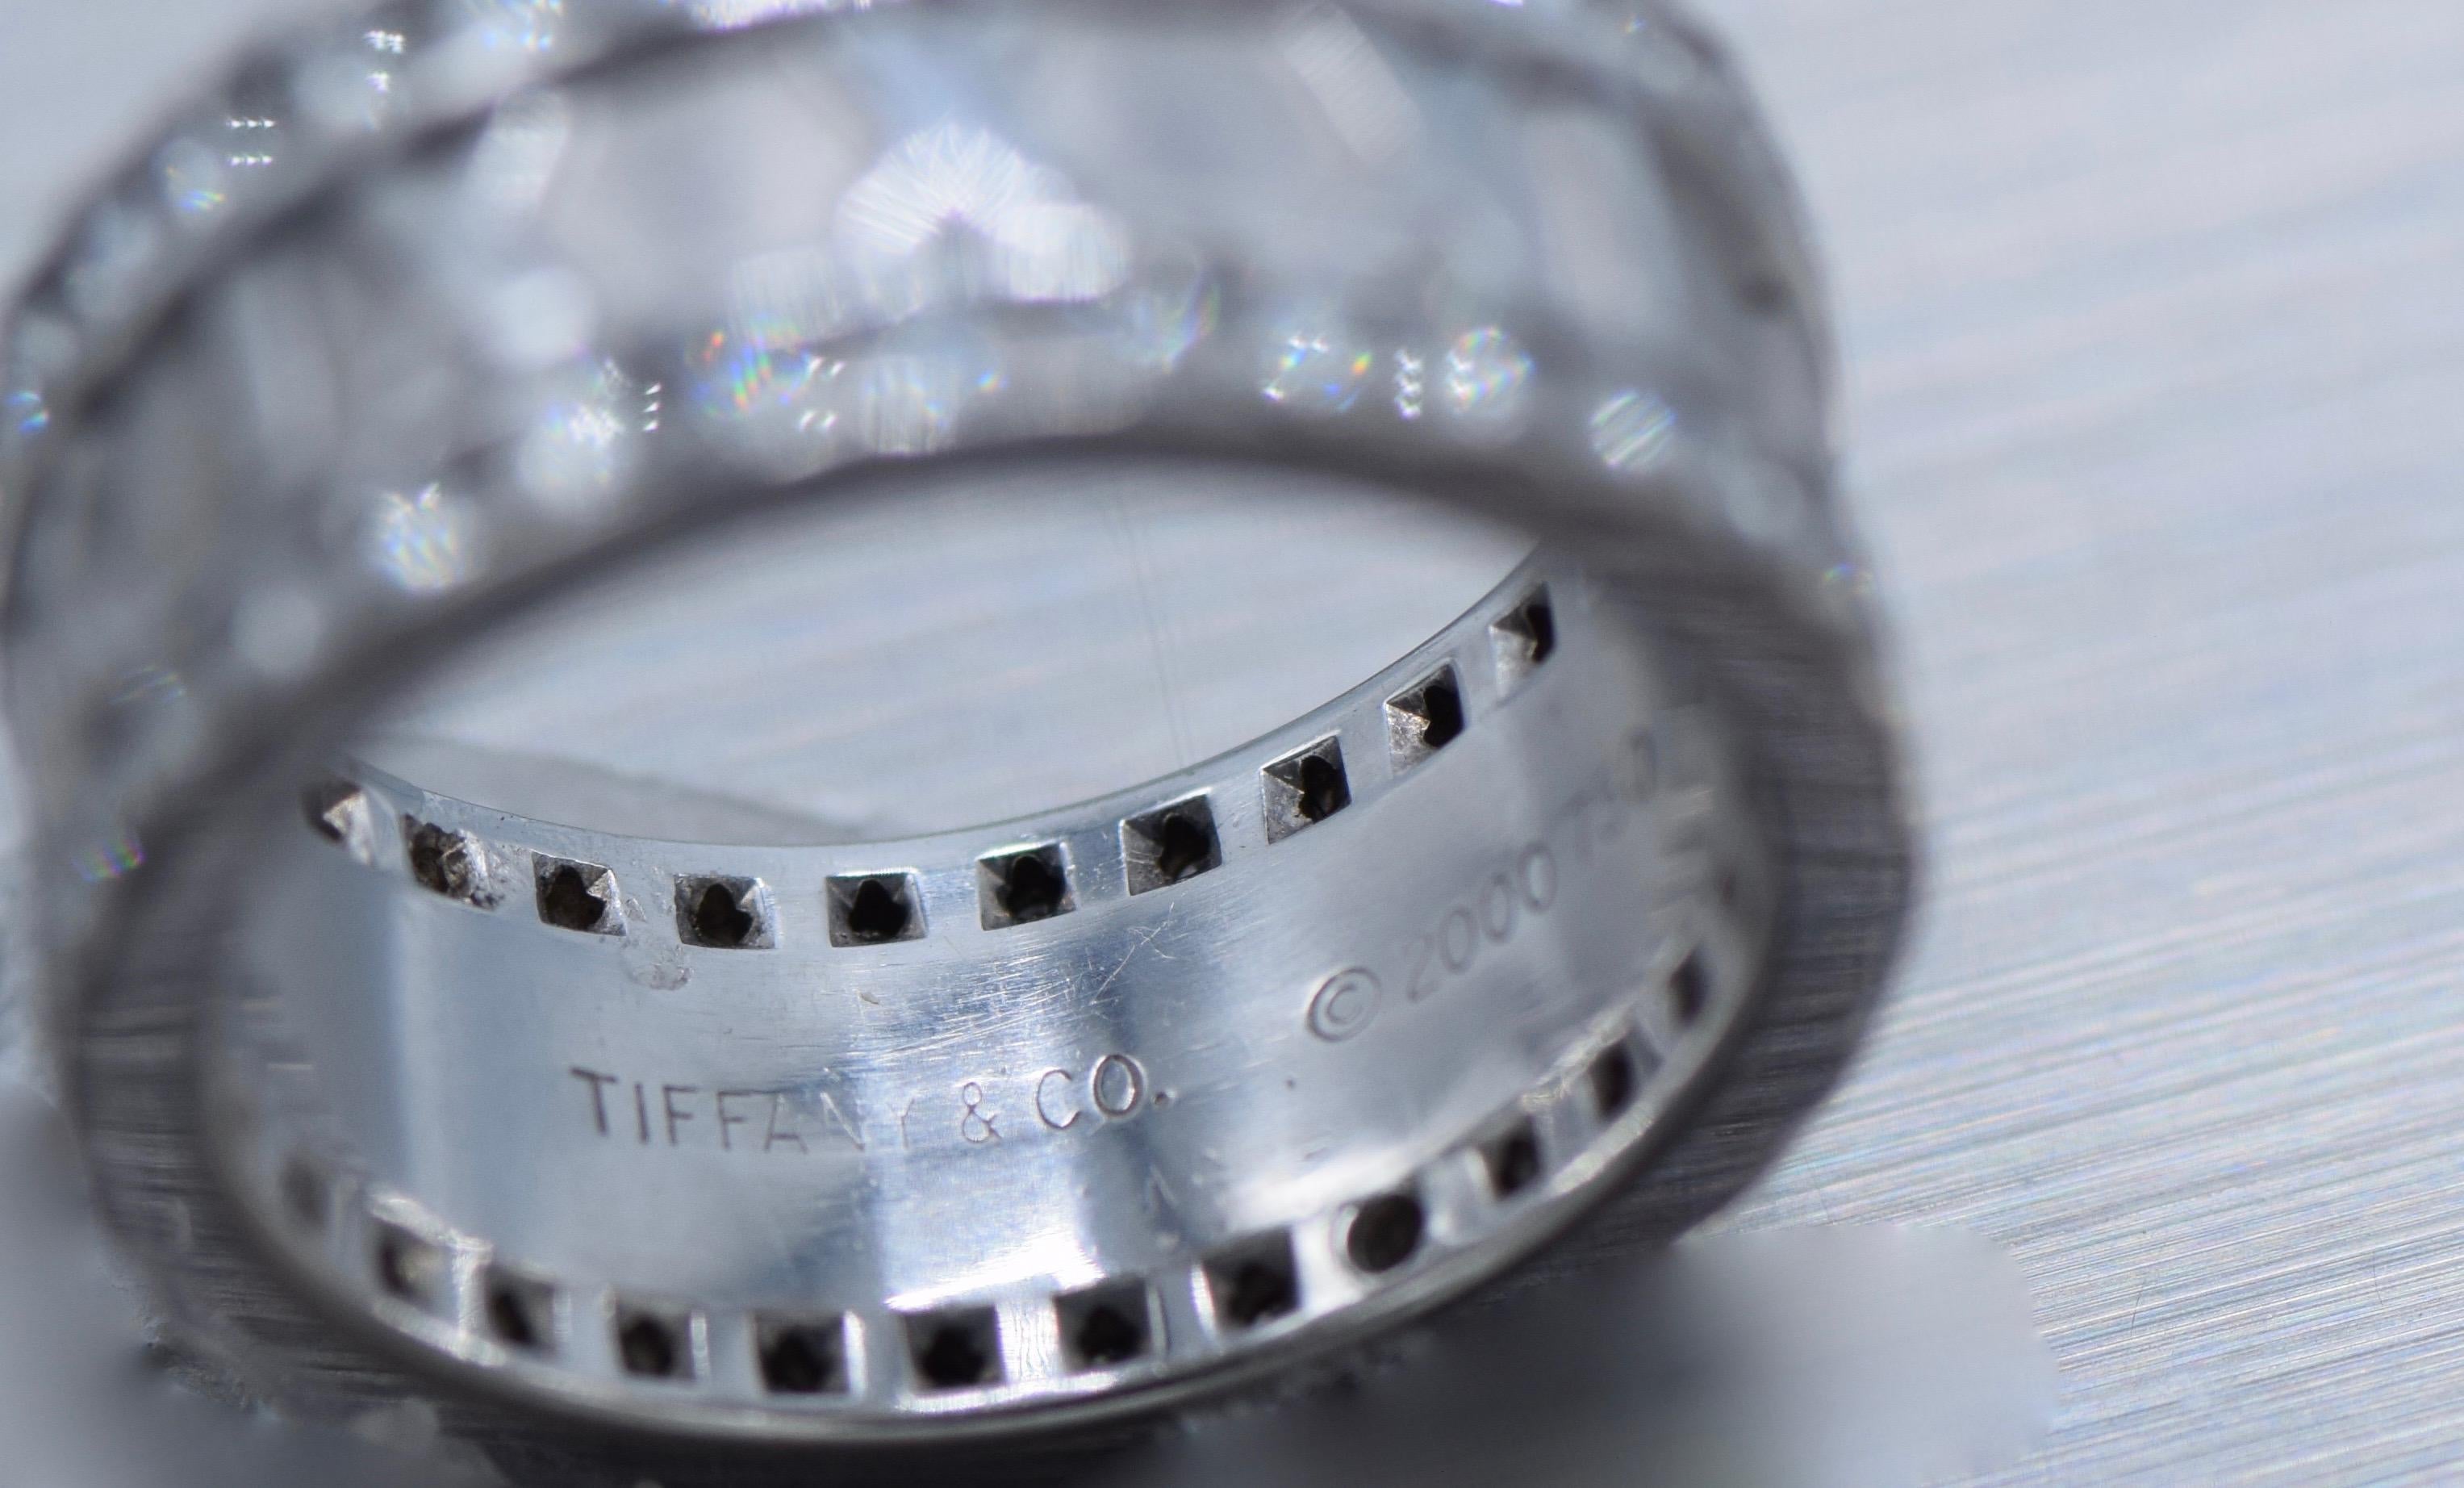 Tiffany & Co. 1.55 Carat Diamond and White Gold 'Atlas' Band Ring In Excellent Condition For Sale In New York, NY